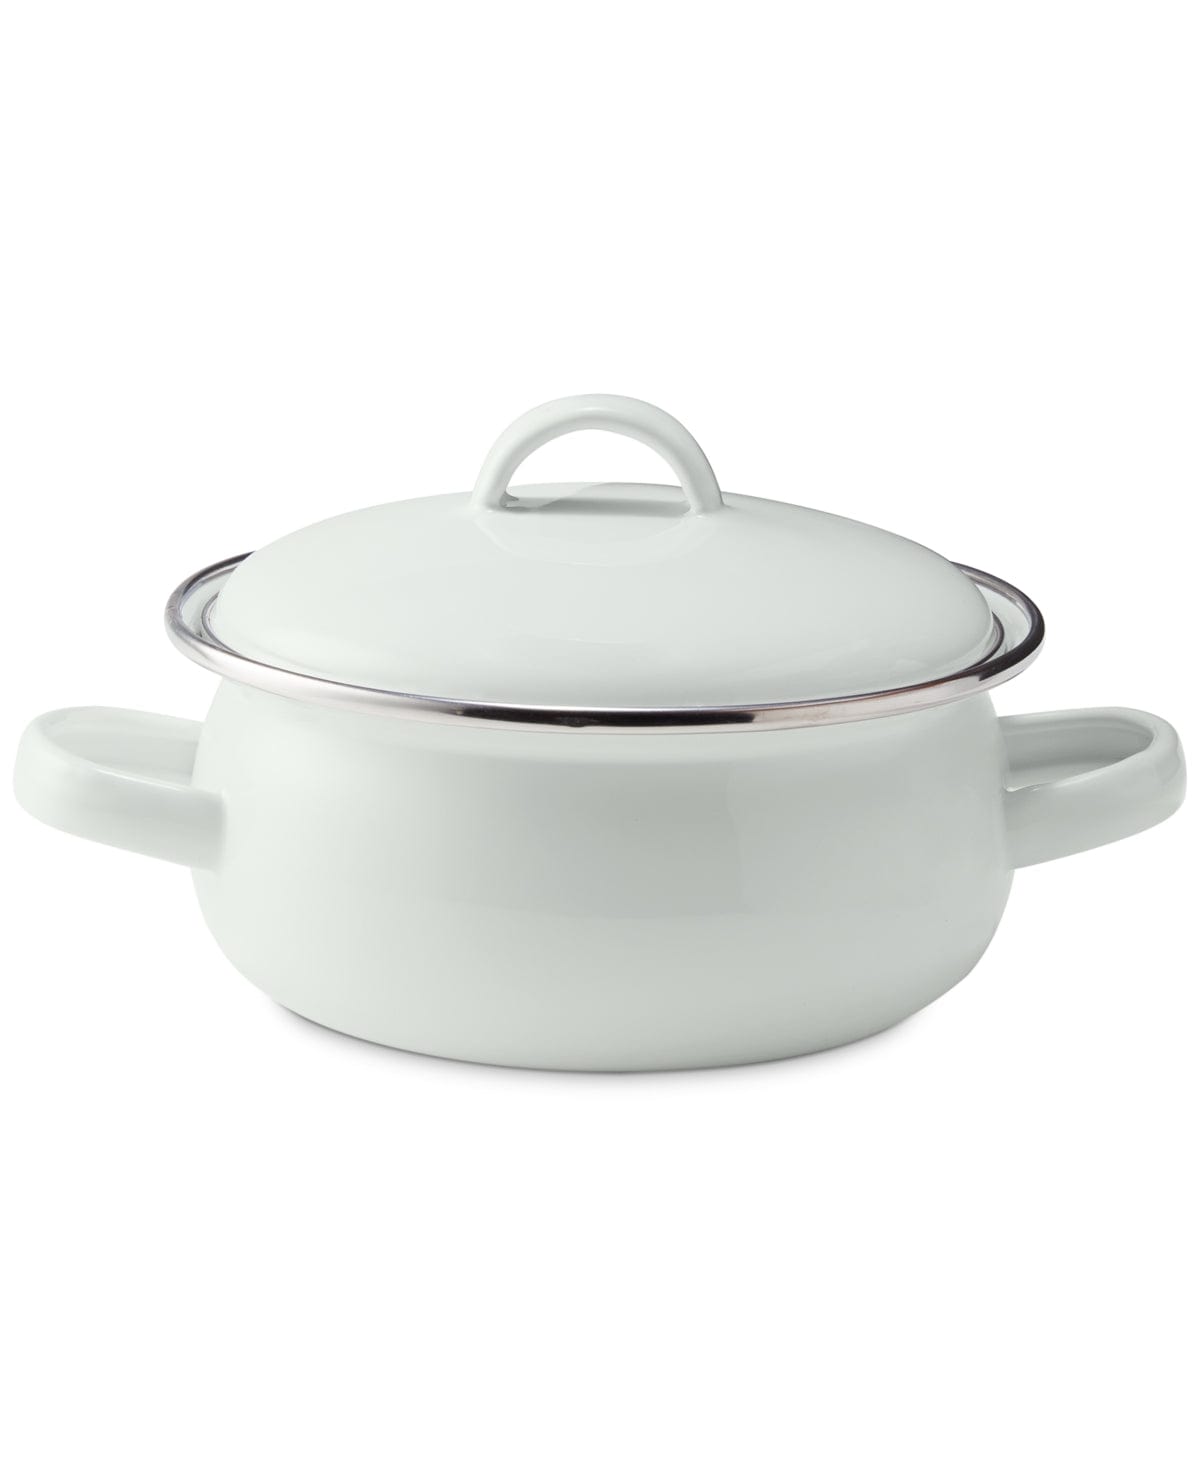 TOOLS OF THE TRADE Kitchenware White TOOLS OF THE TRADE -  Mini Dutch Oven